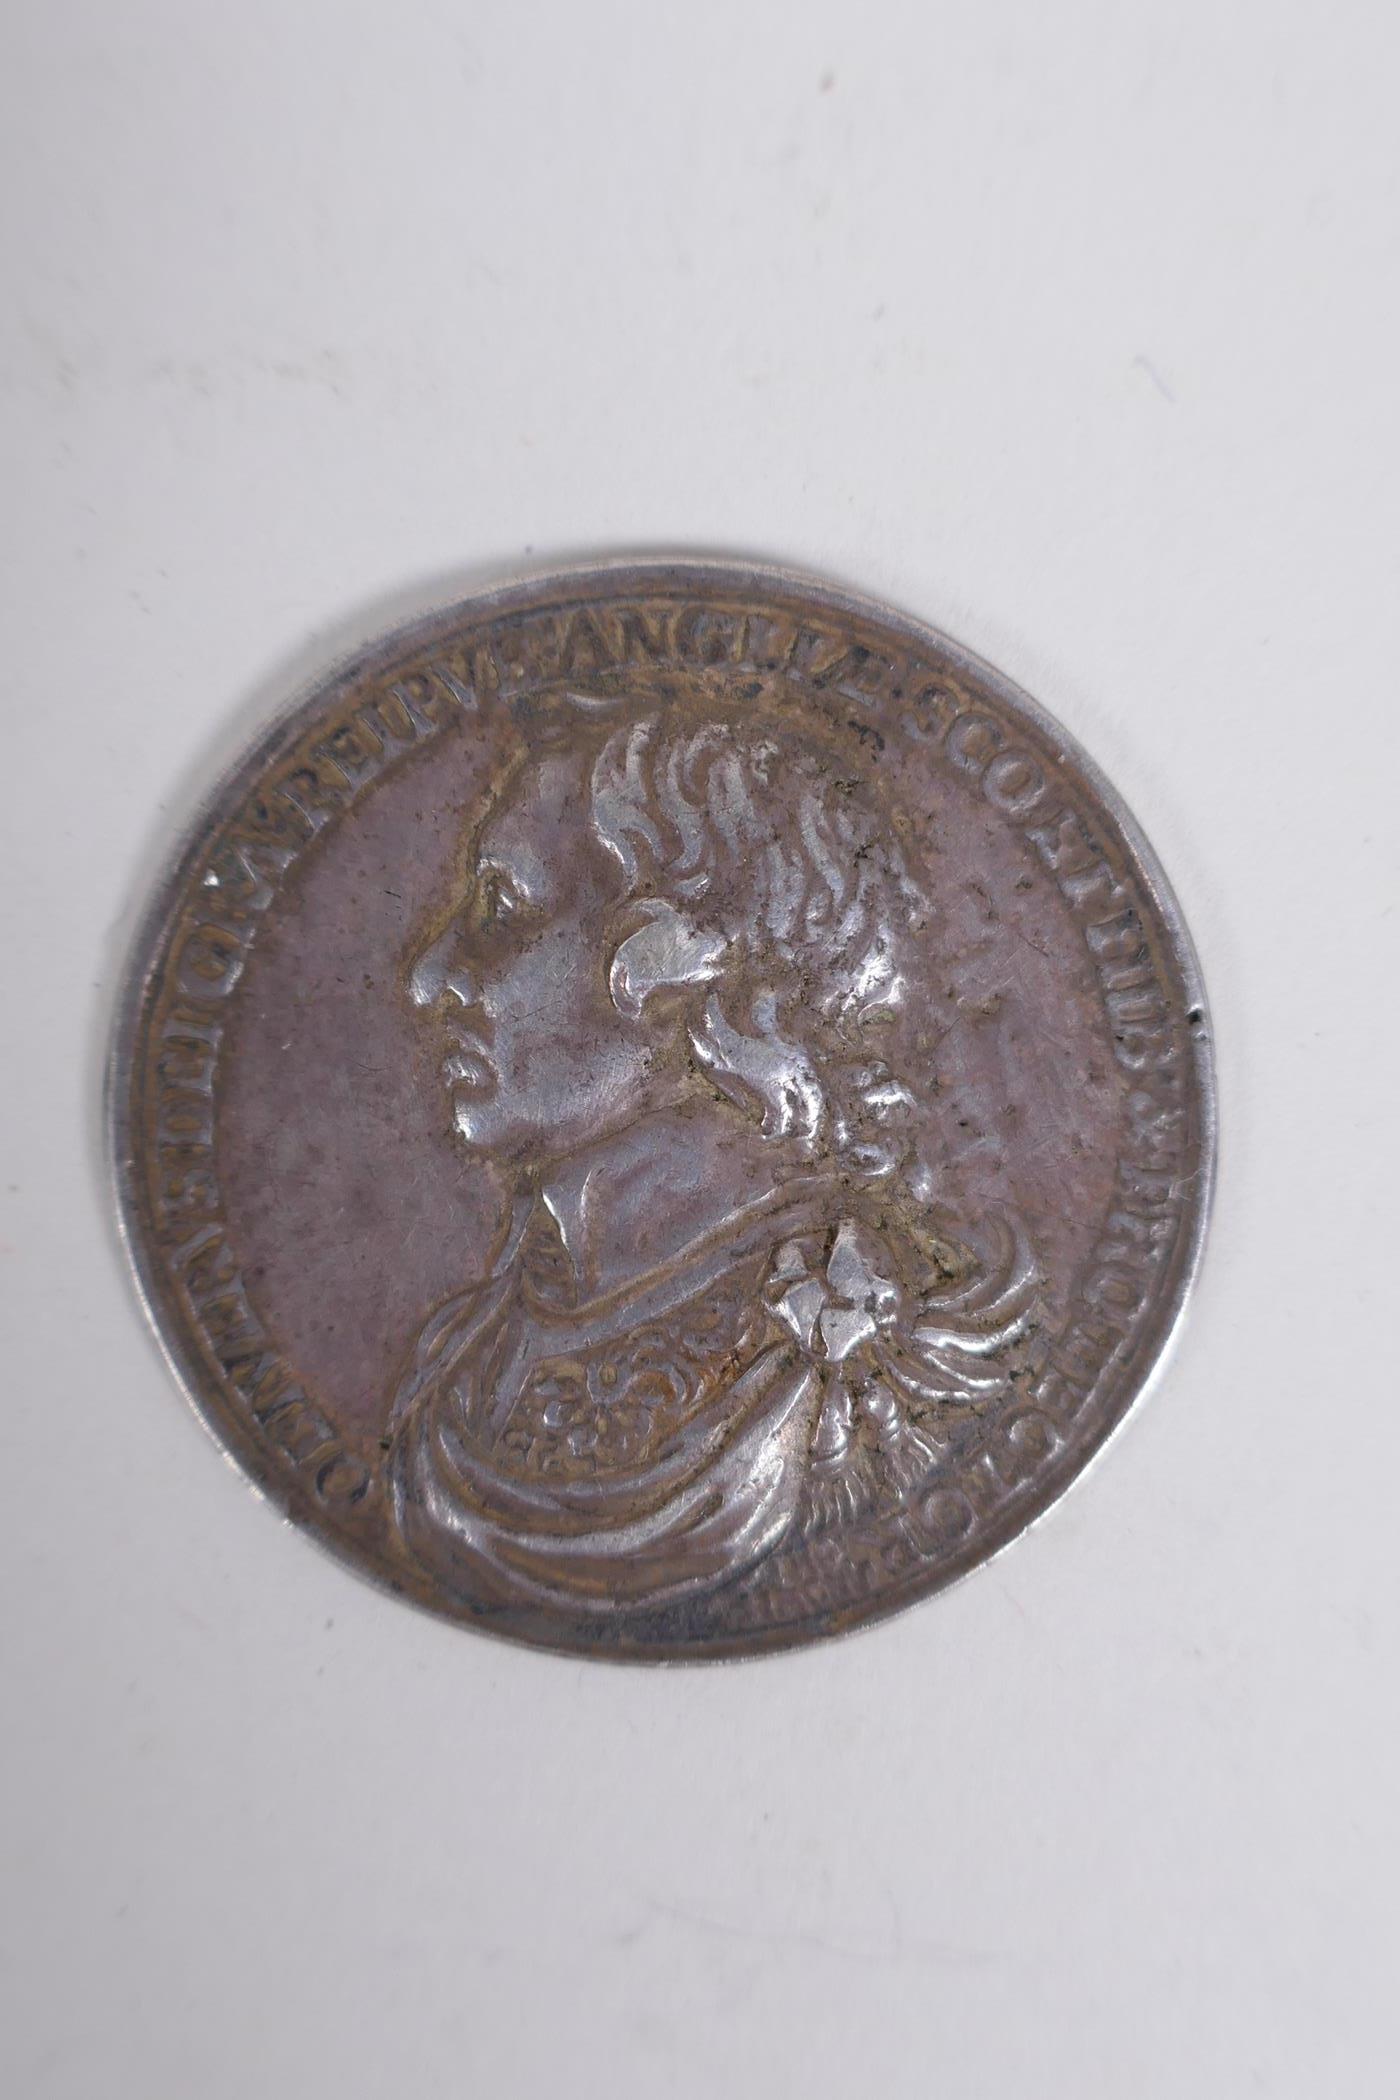 Oliver Cromwell, Lord Protector, cast silver medal, 1653, by Thomas Simon, armoured and draped - Image 2 of 4